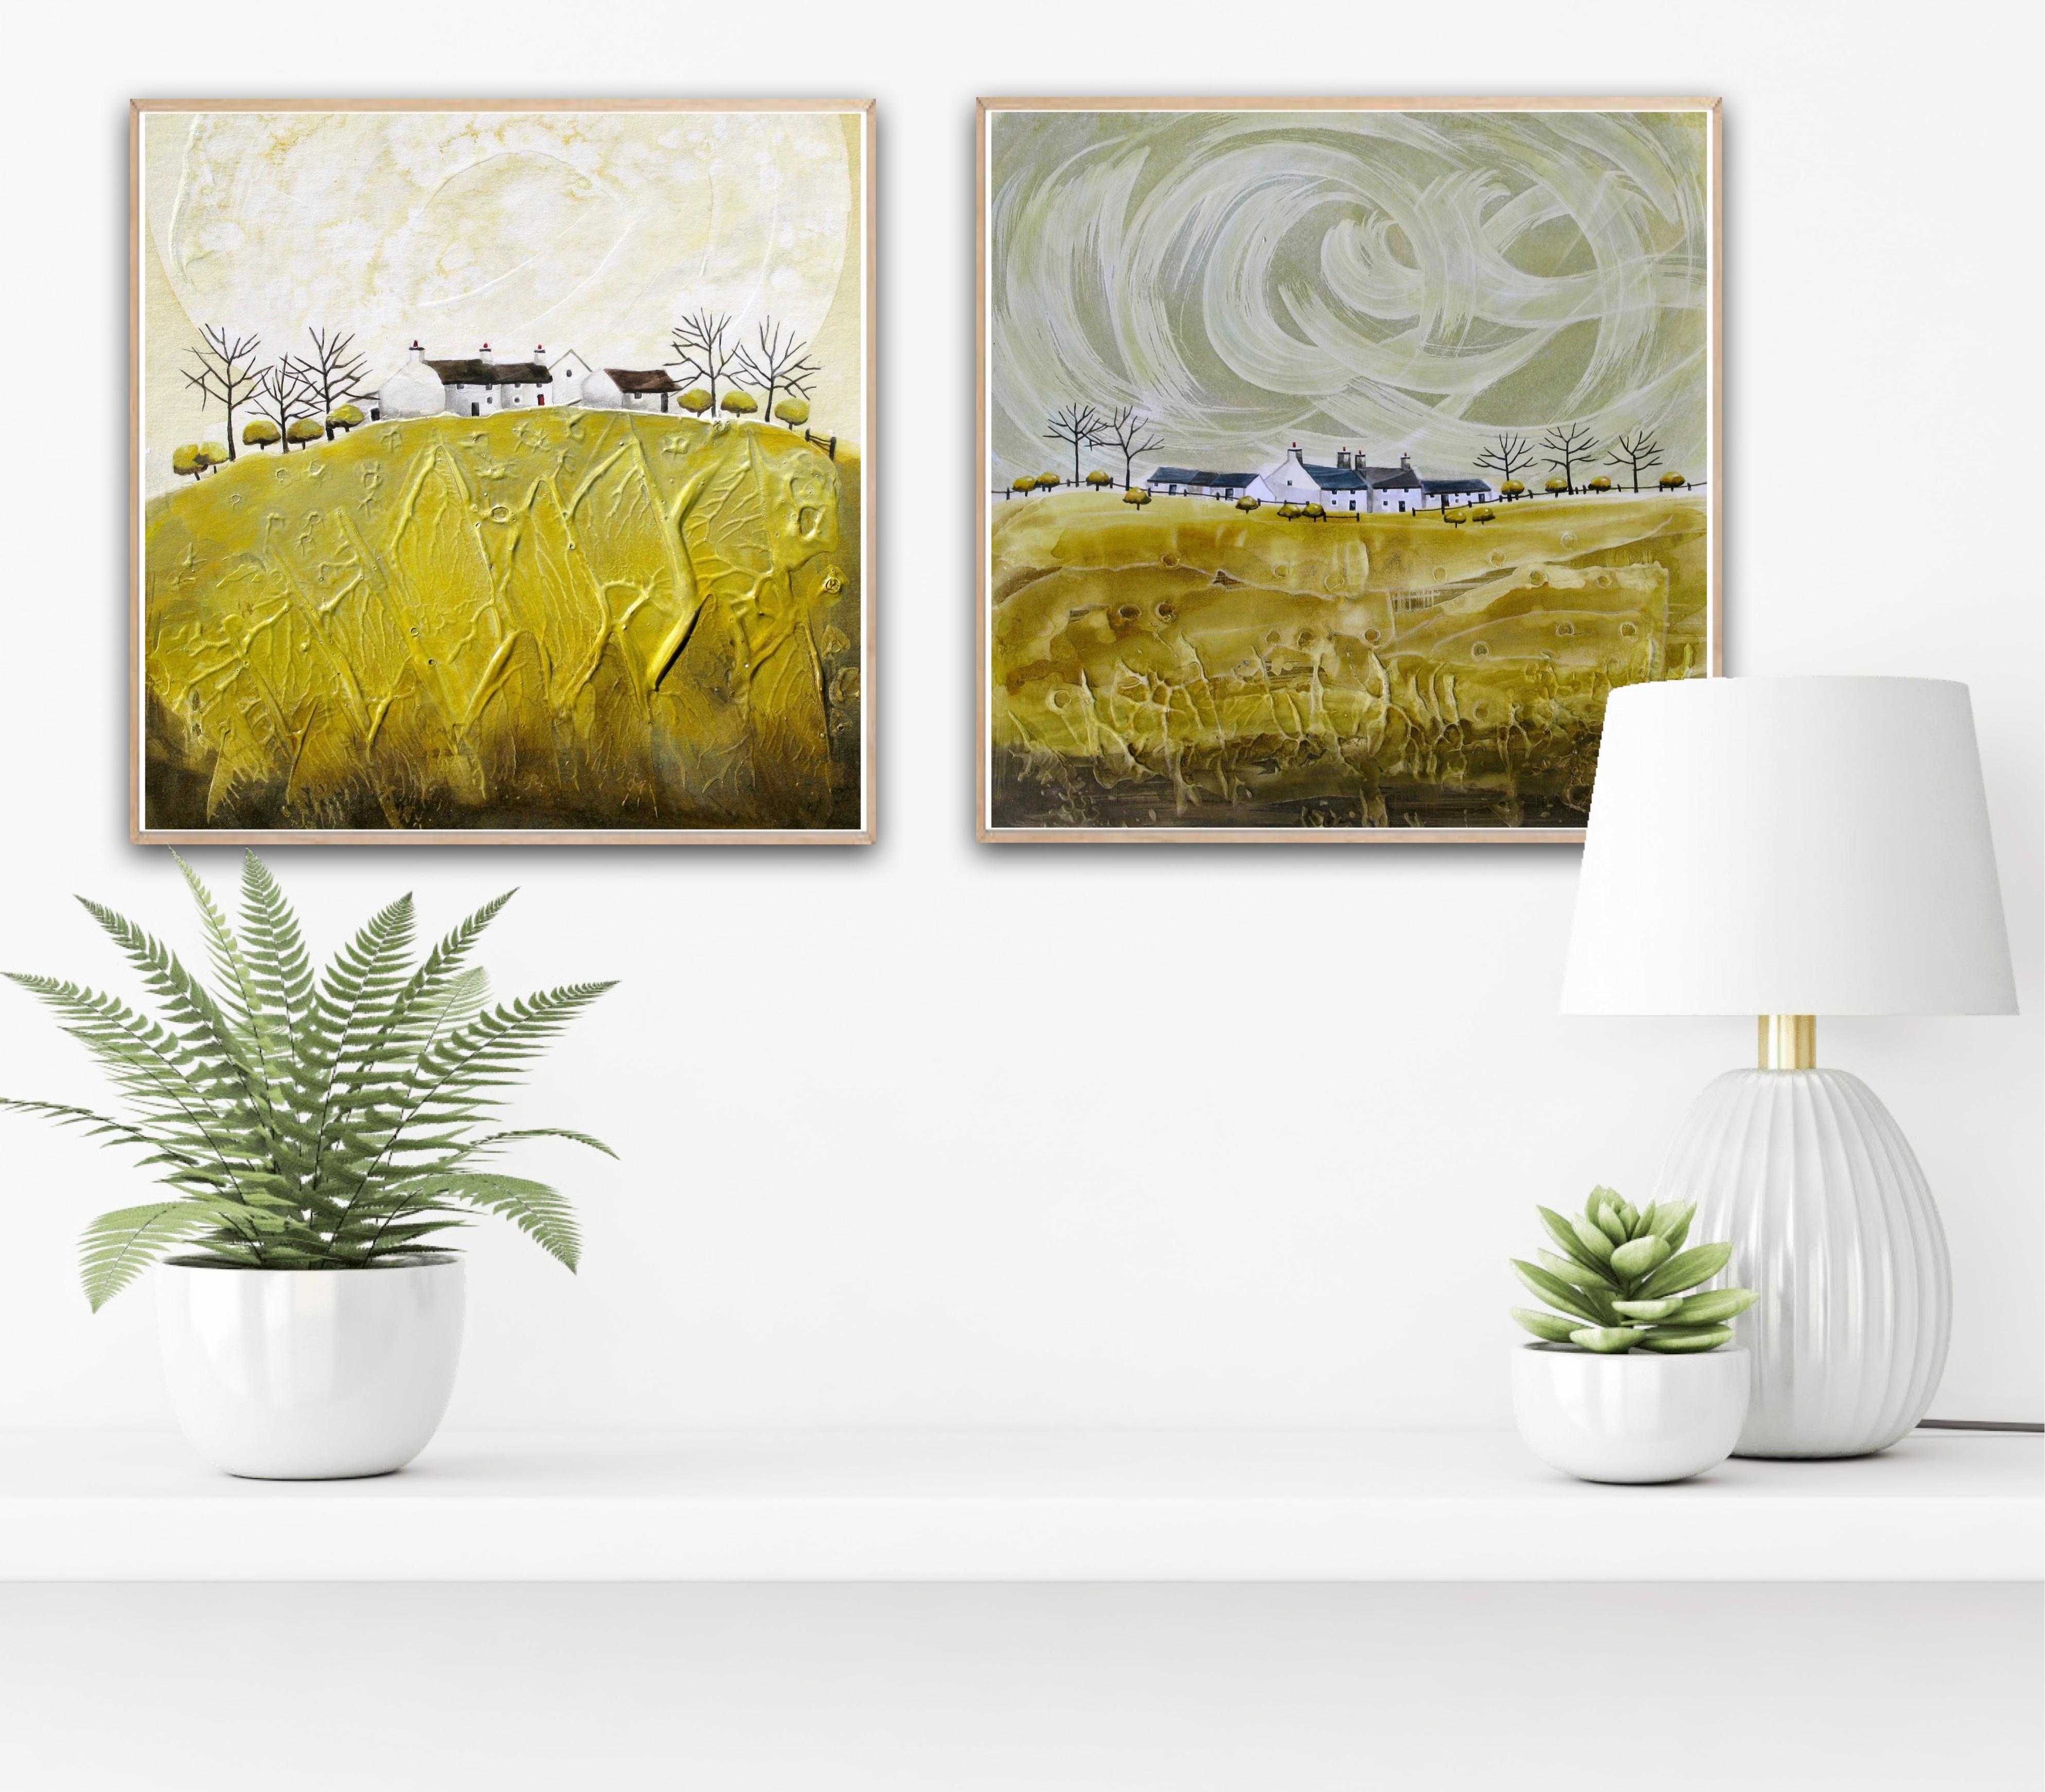 Crater Valley Farm and Crater Cottages 3 diptych - Beige Landscape Painting by Anya Simmons